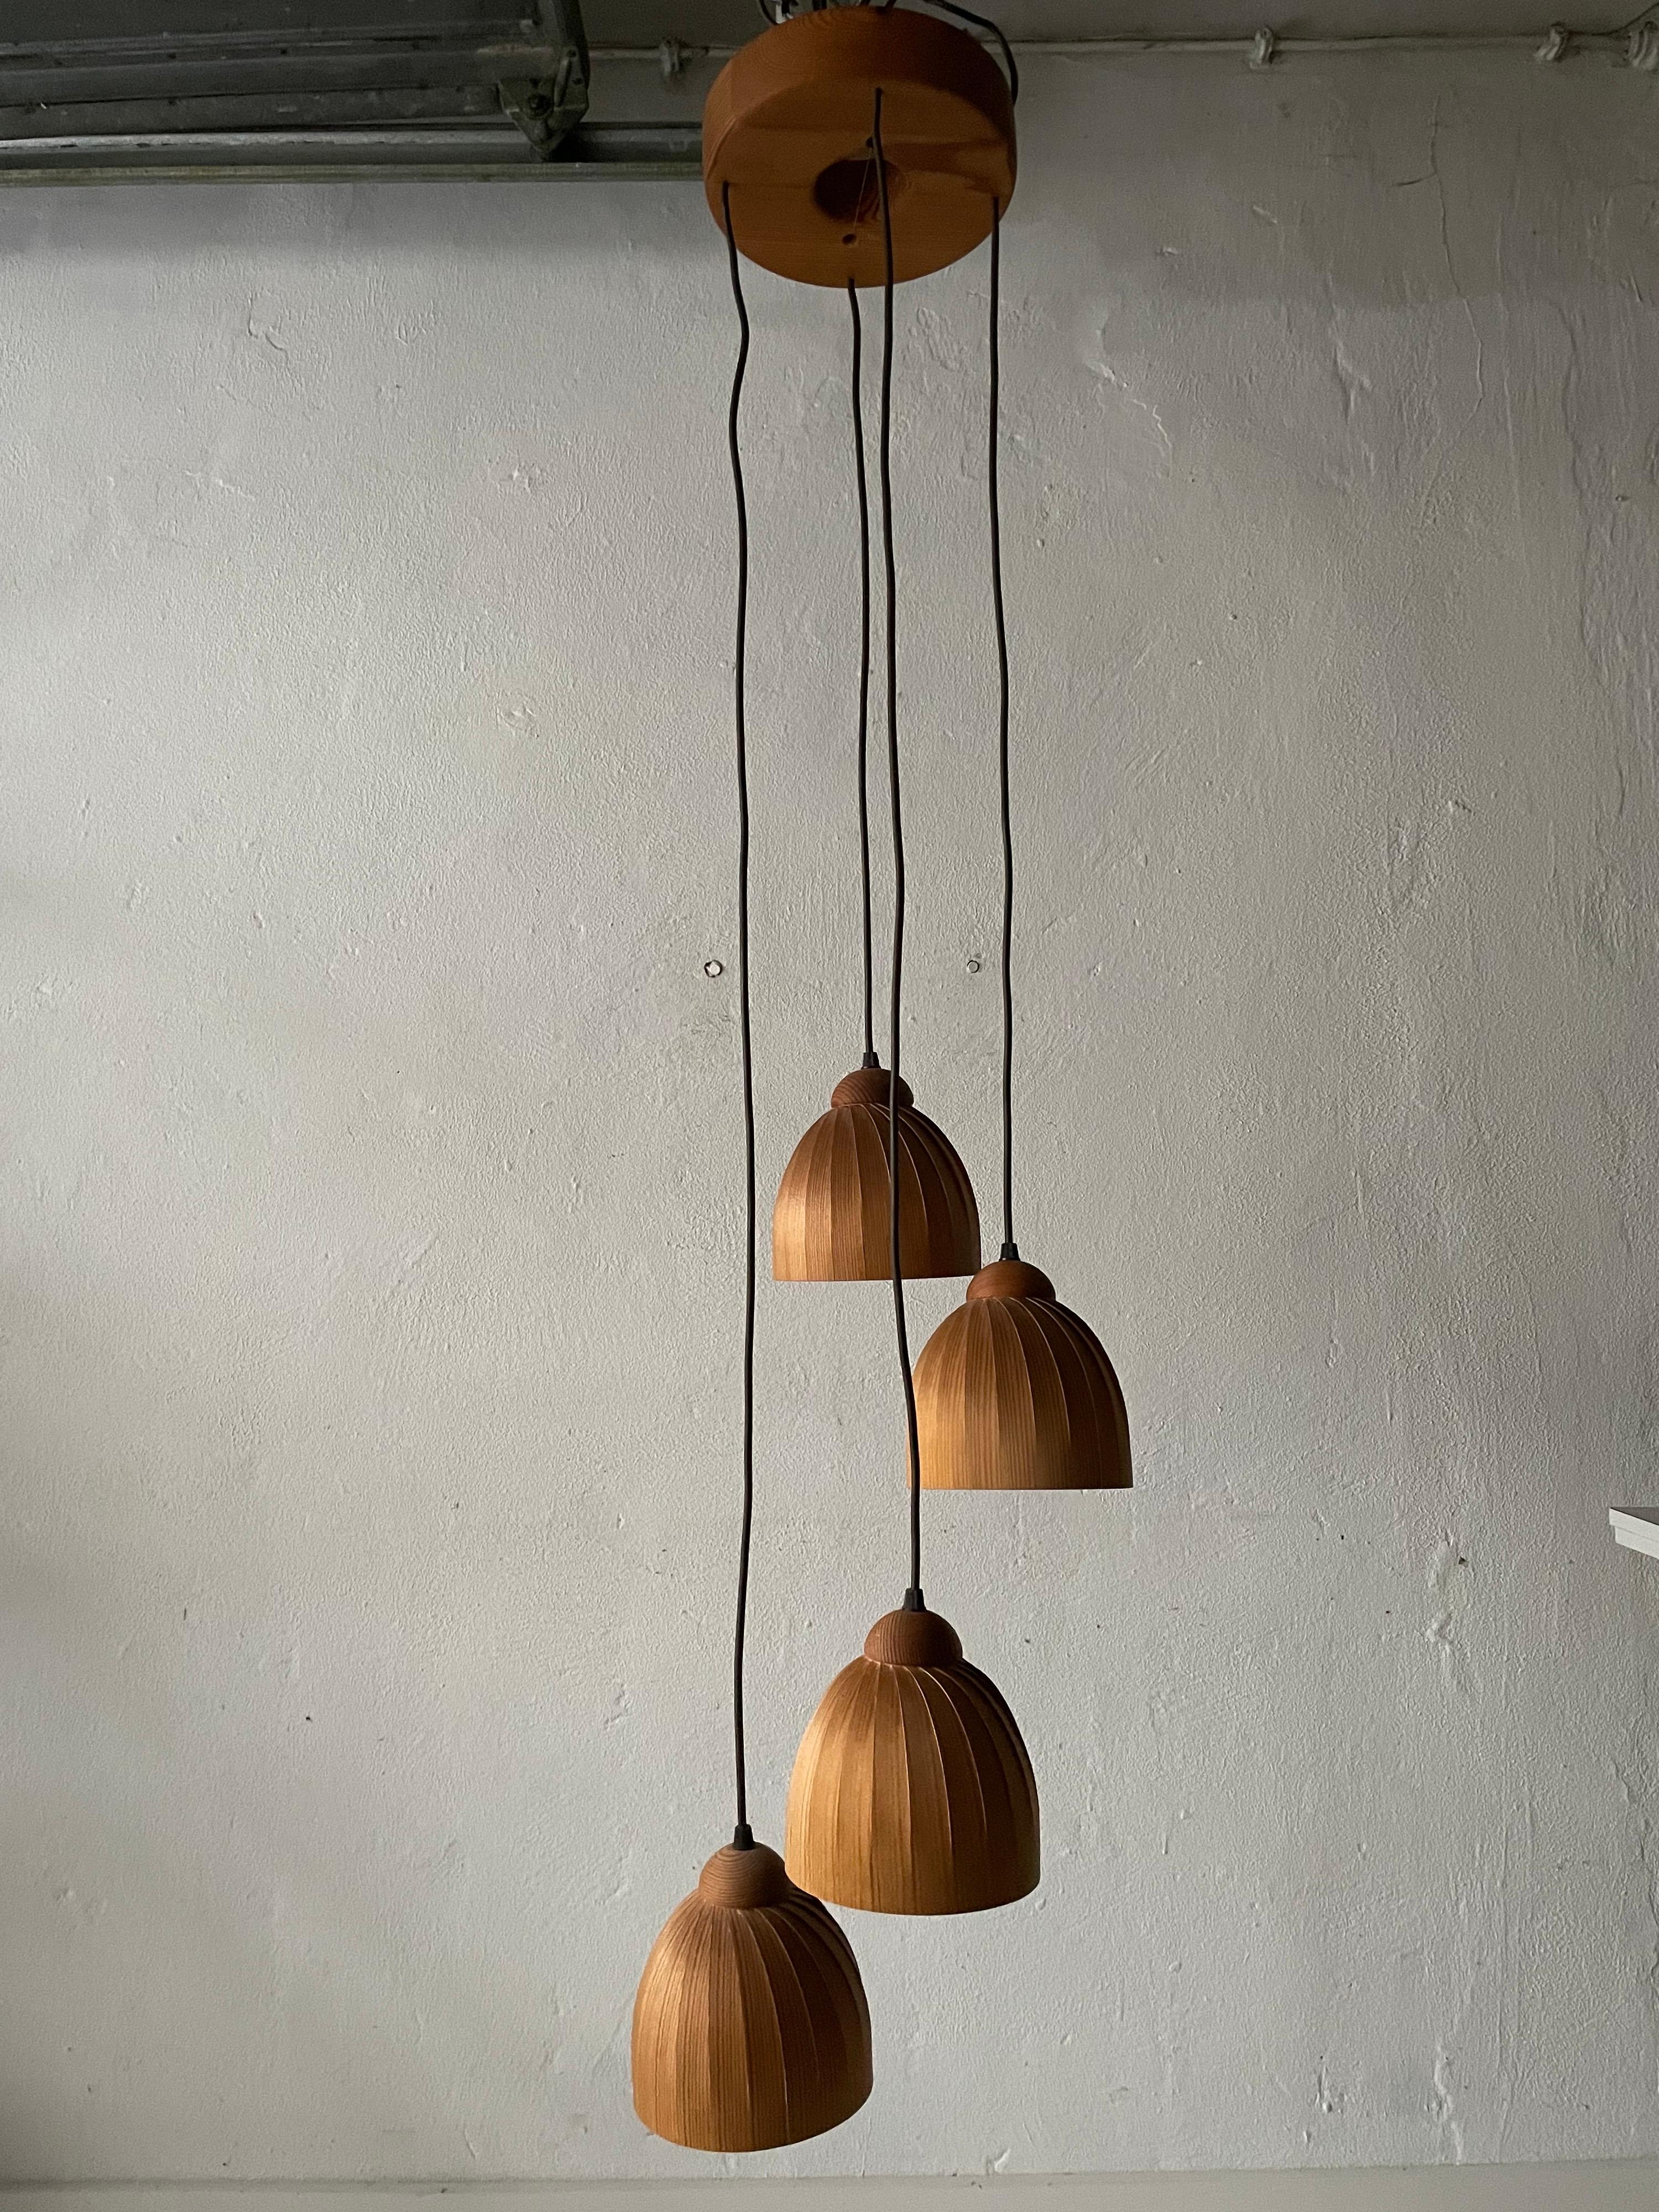 Cascade Pendant Lamp by Hans-Agne Jakobsson for AB Ellysett Markaryd, 1960s, Swe In Good Condition For Sale In Hagenbach, DE